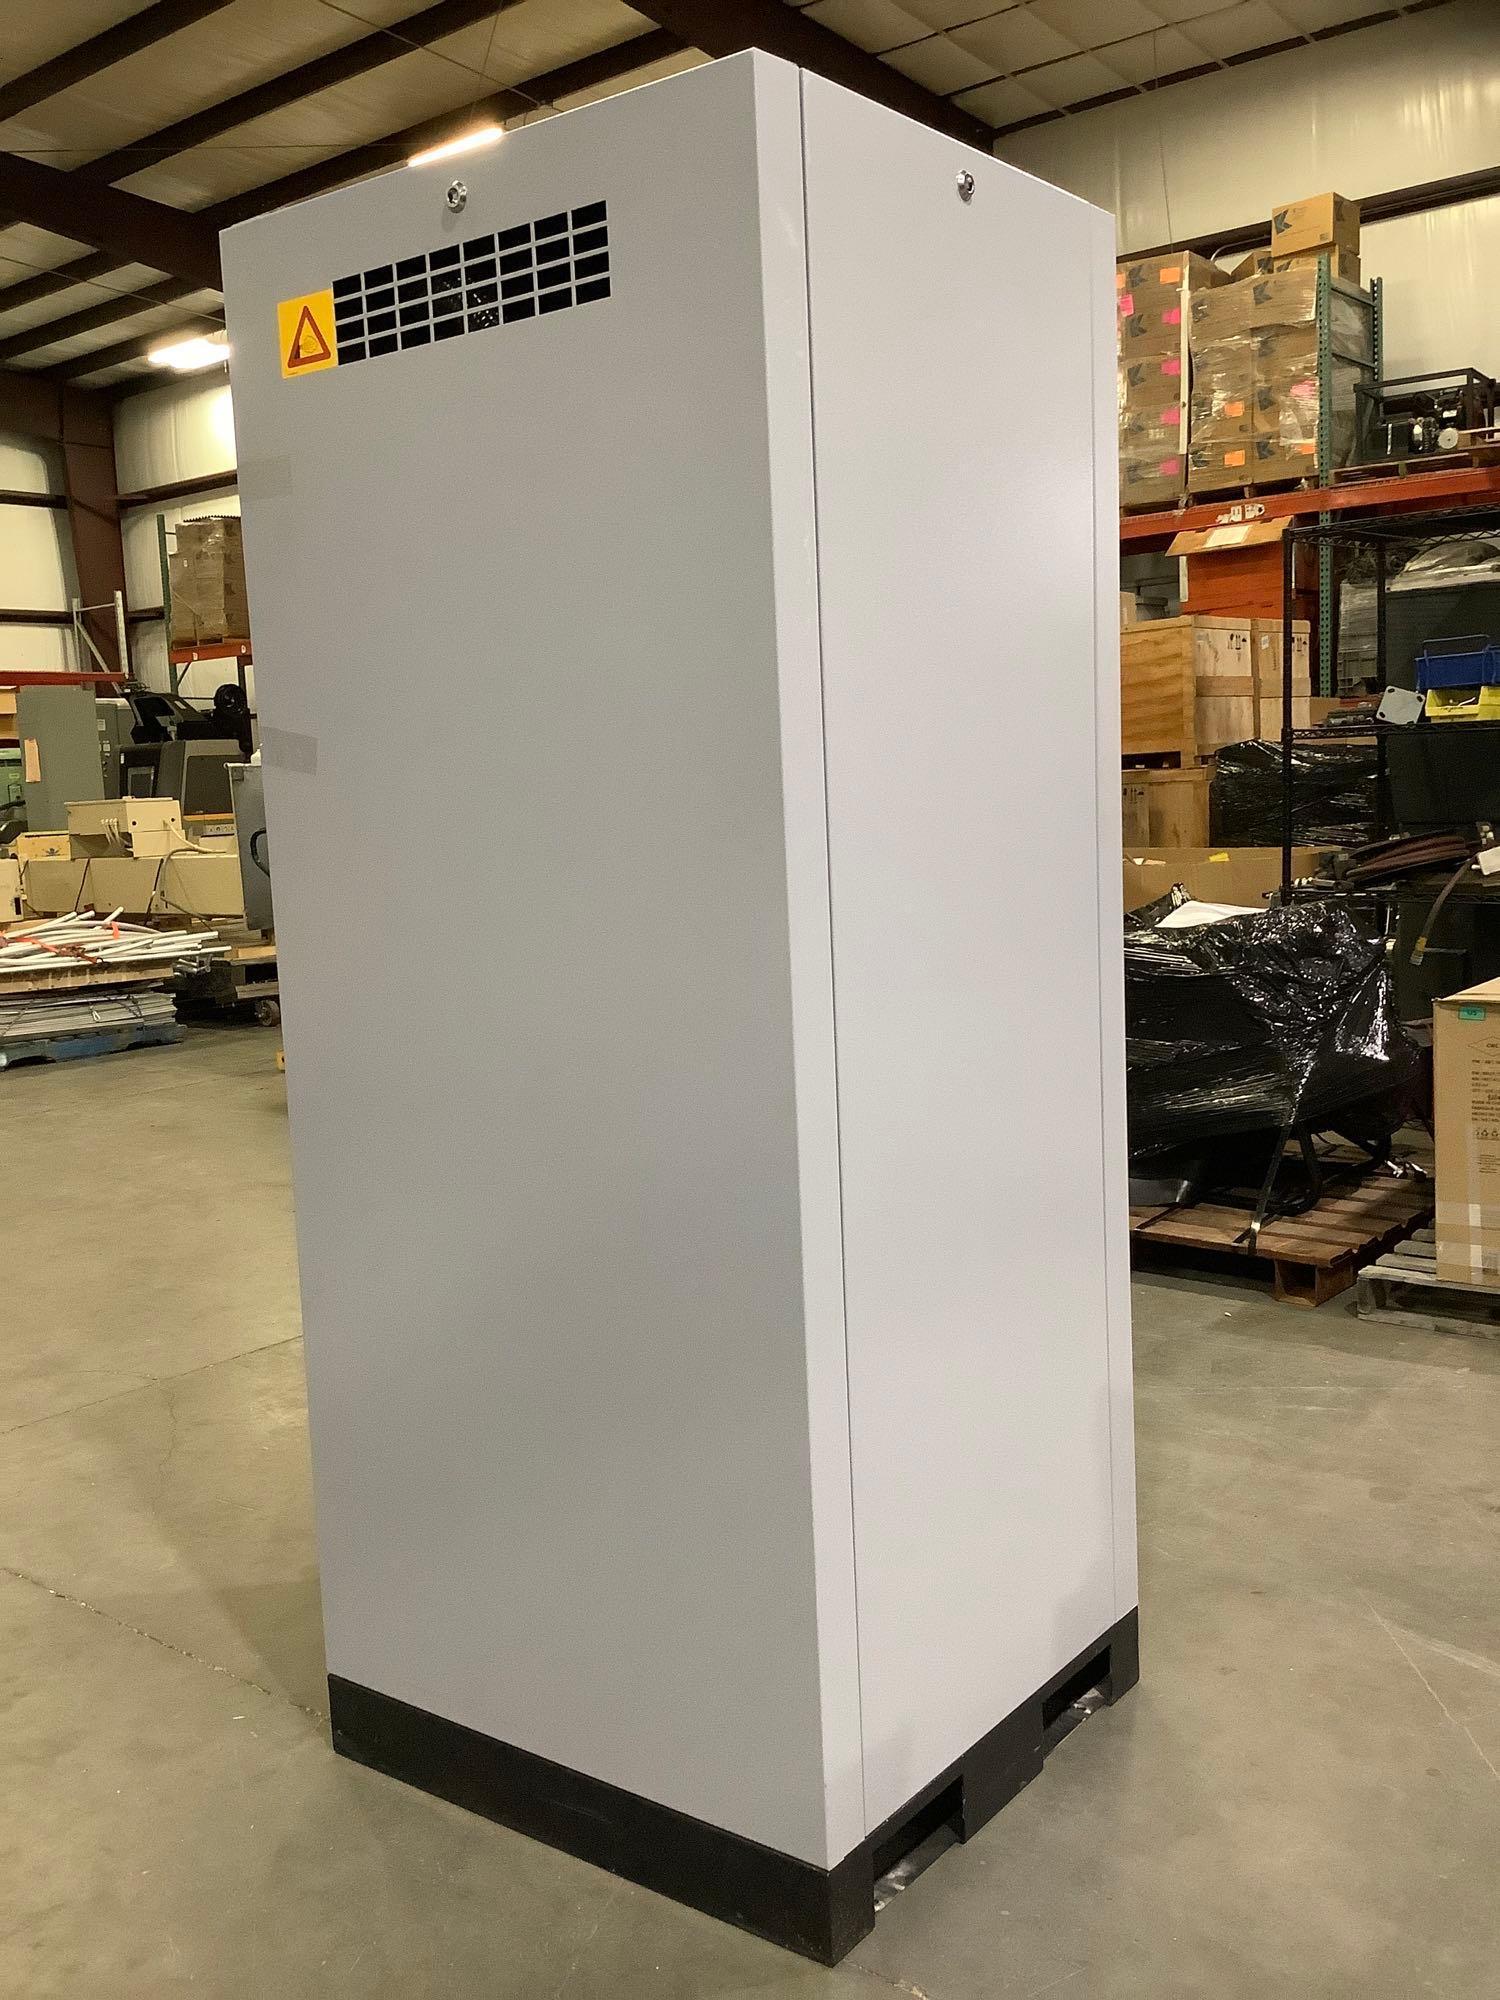 2021 PPNG PNEUMATECH NITROGEN GENERATOR TYPE PPNG15 HE 0/0, APPROX MAX ALLOWABLE INLET PRESSURE 1...